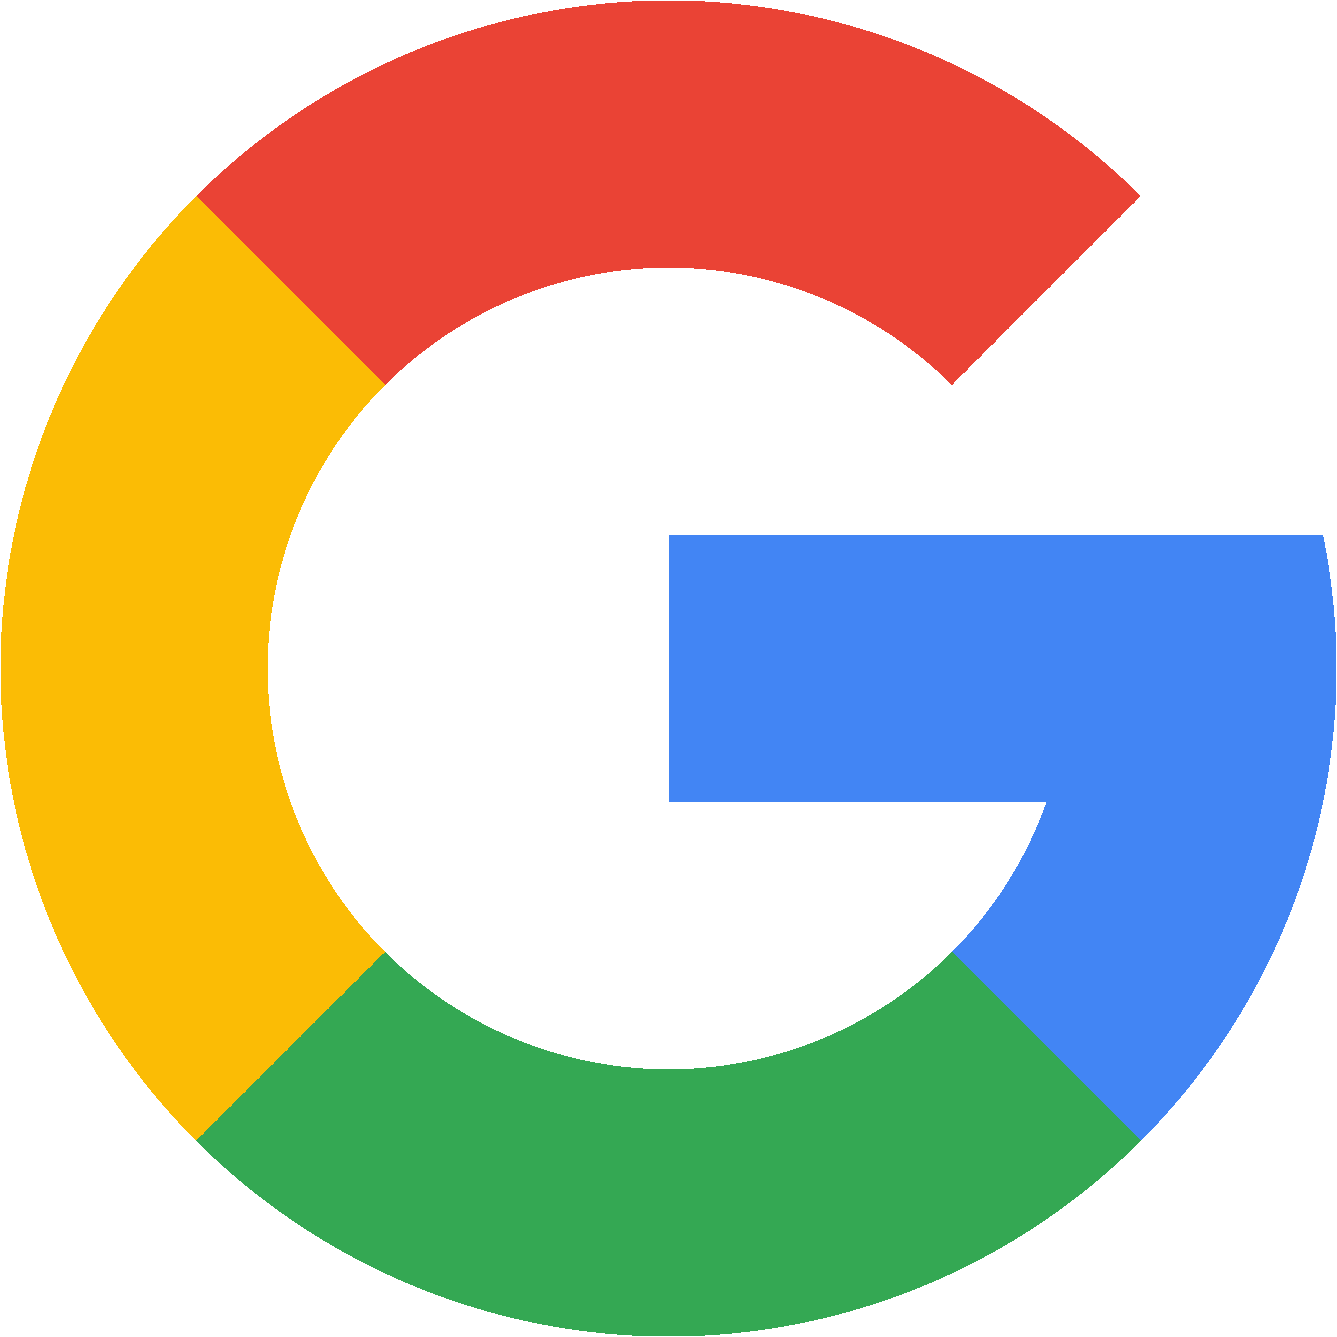 Google G Logo - code golf - Appease Your Google Overlords: Draw the 